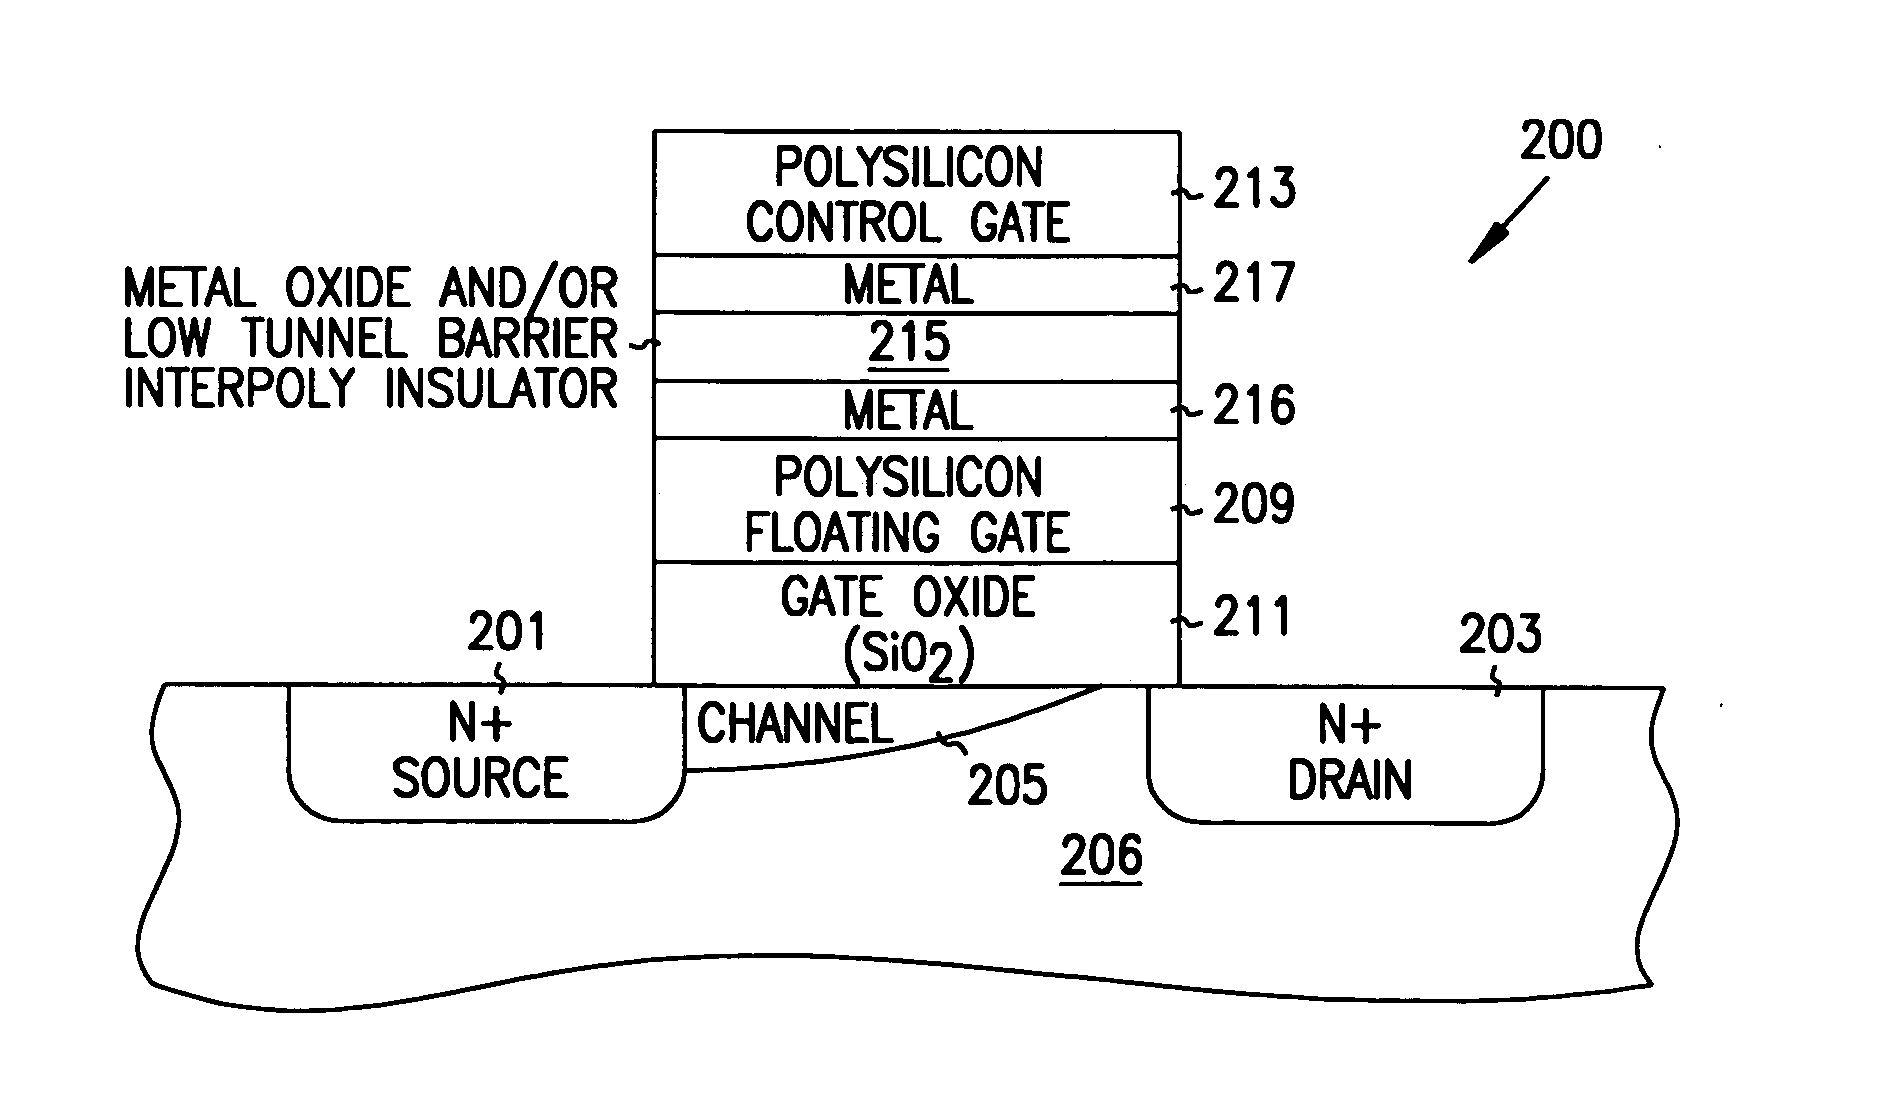 Atomic layer deposition of metal oxide and/or low asymmetrical tunnel barrier interpoly insulators